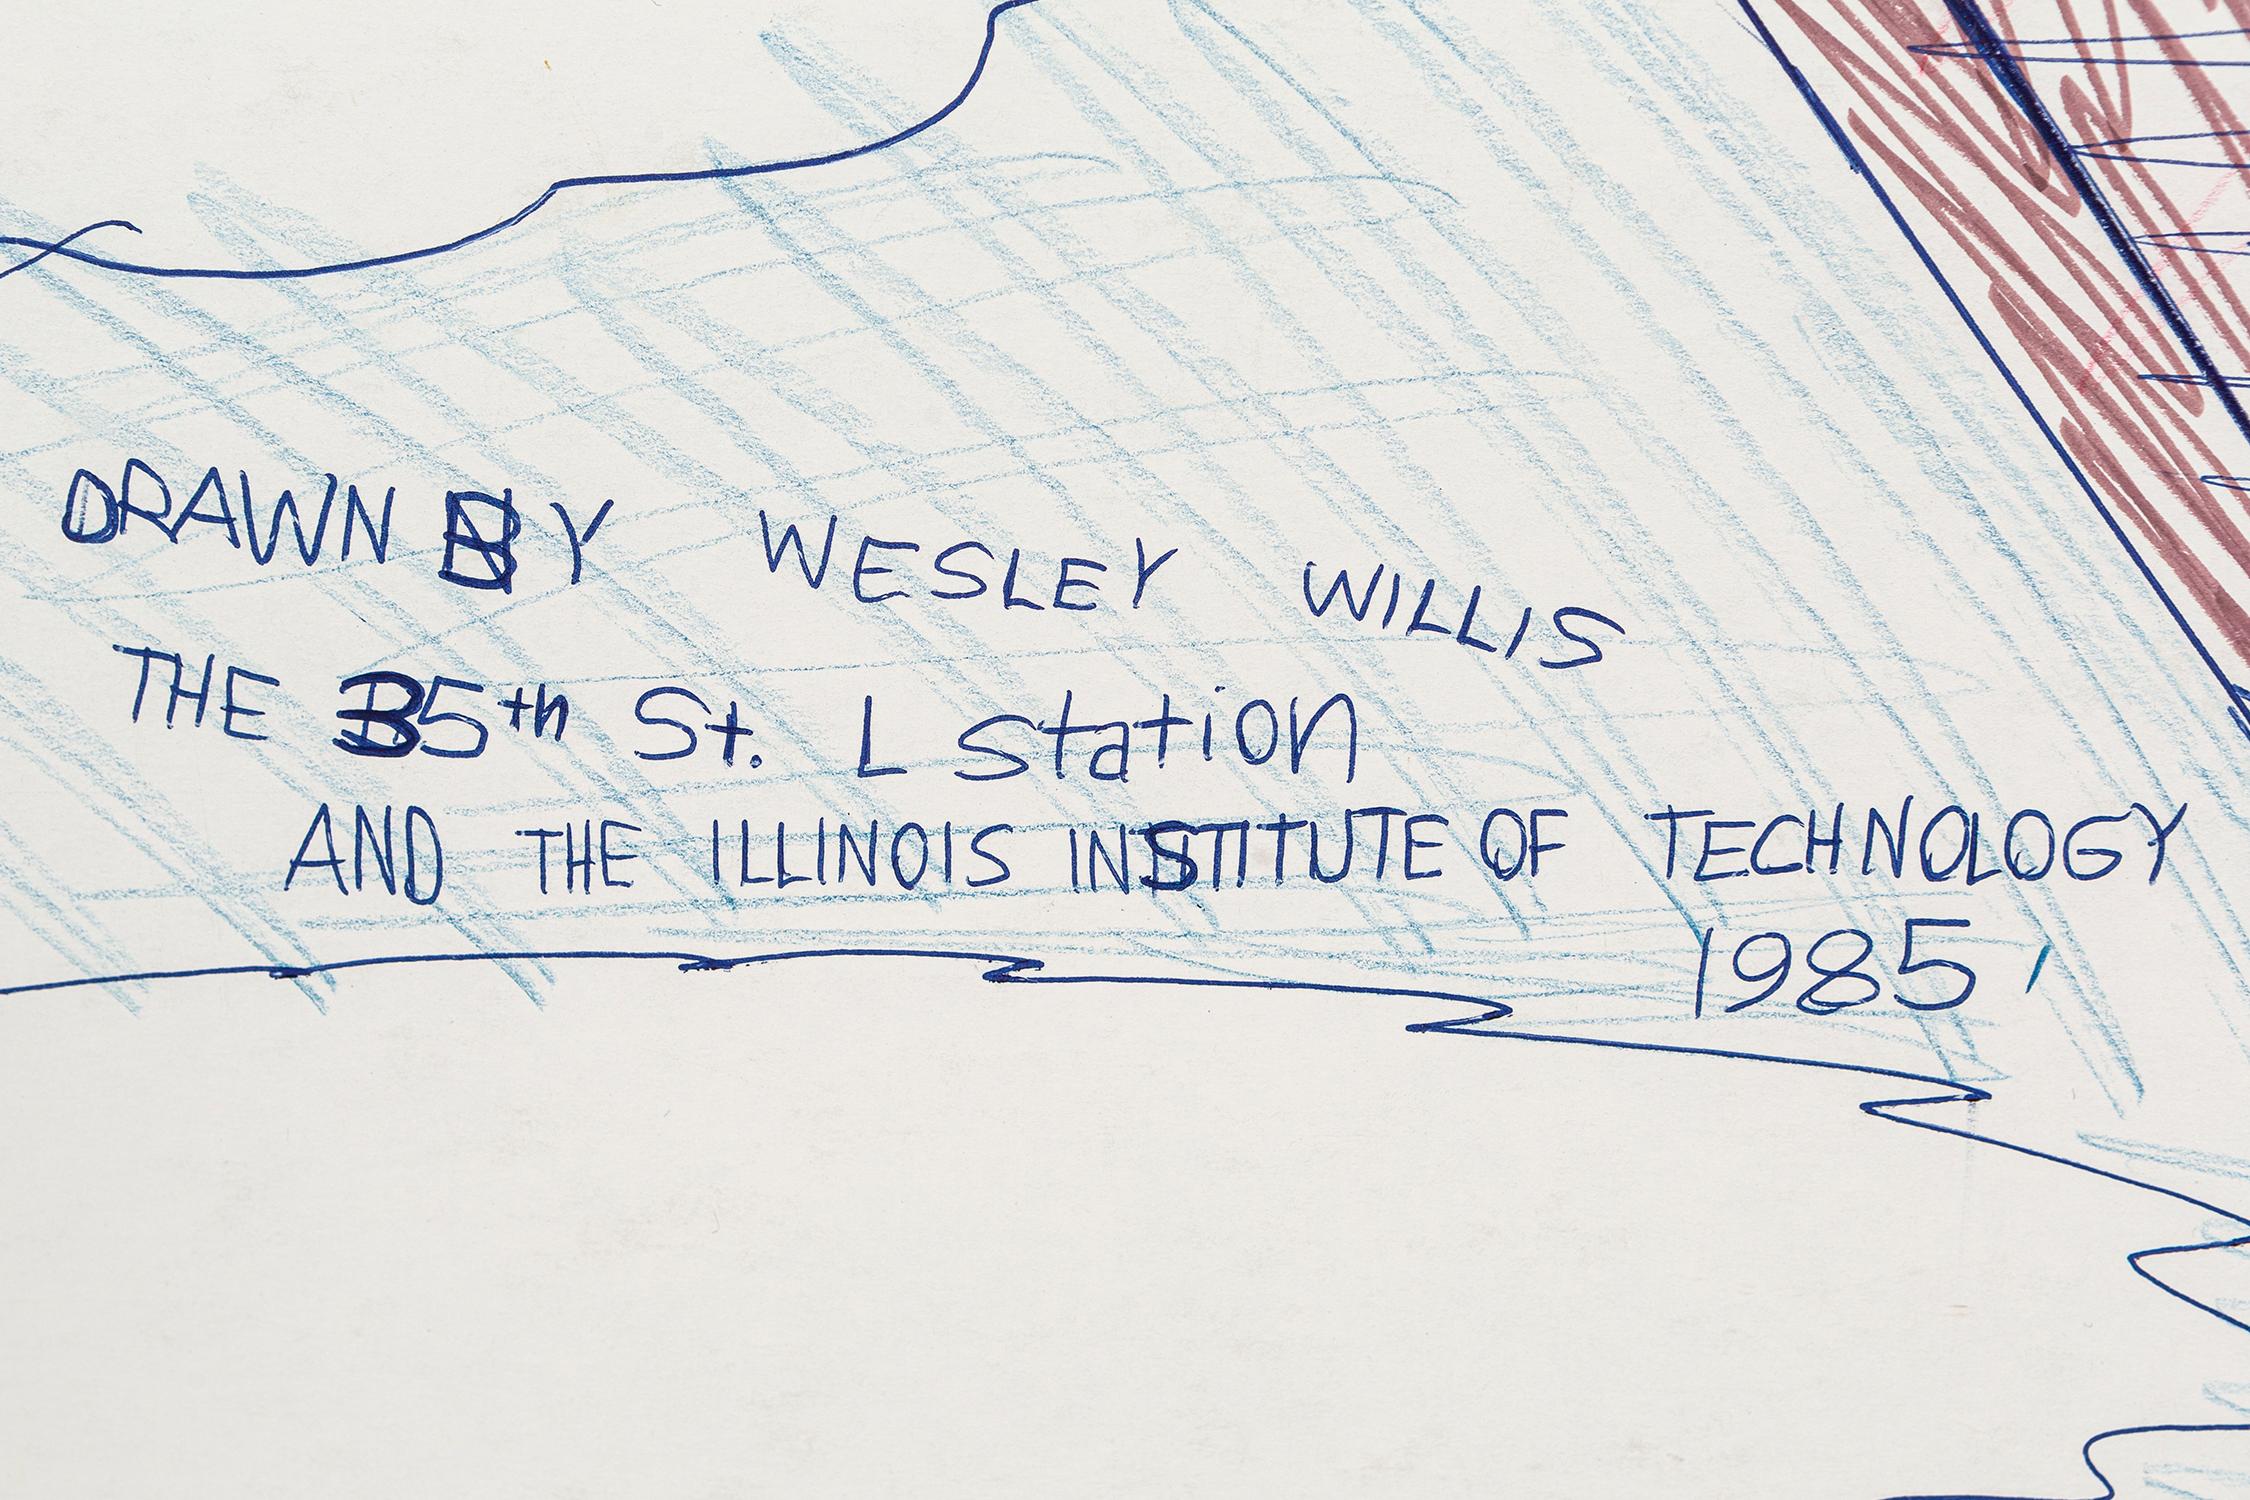 The 35th St. L Station - Contemporary Art by Wesley Willis